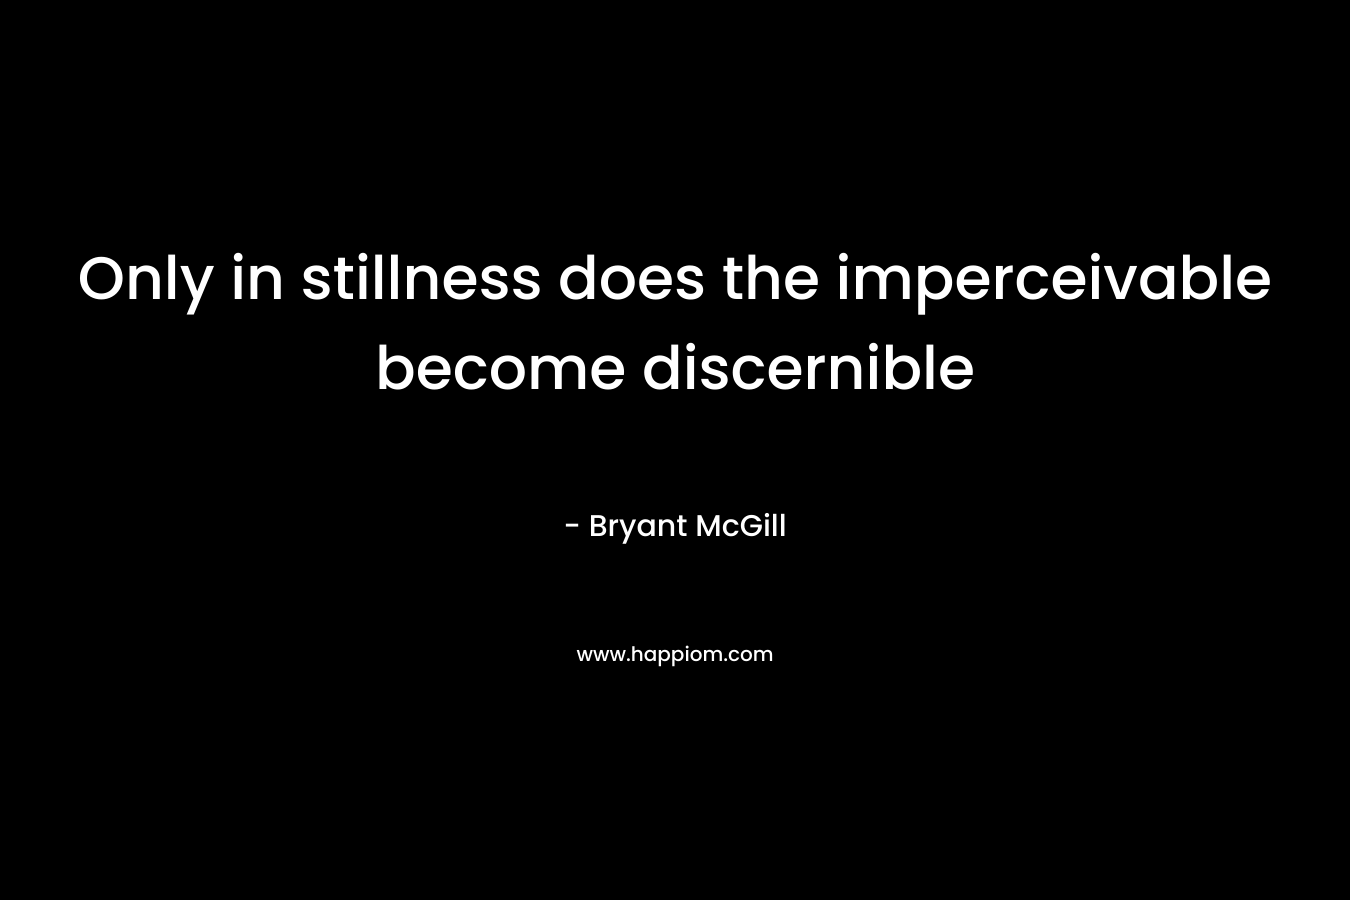 Only in stillness does the imperceivable become discernible